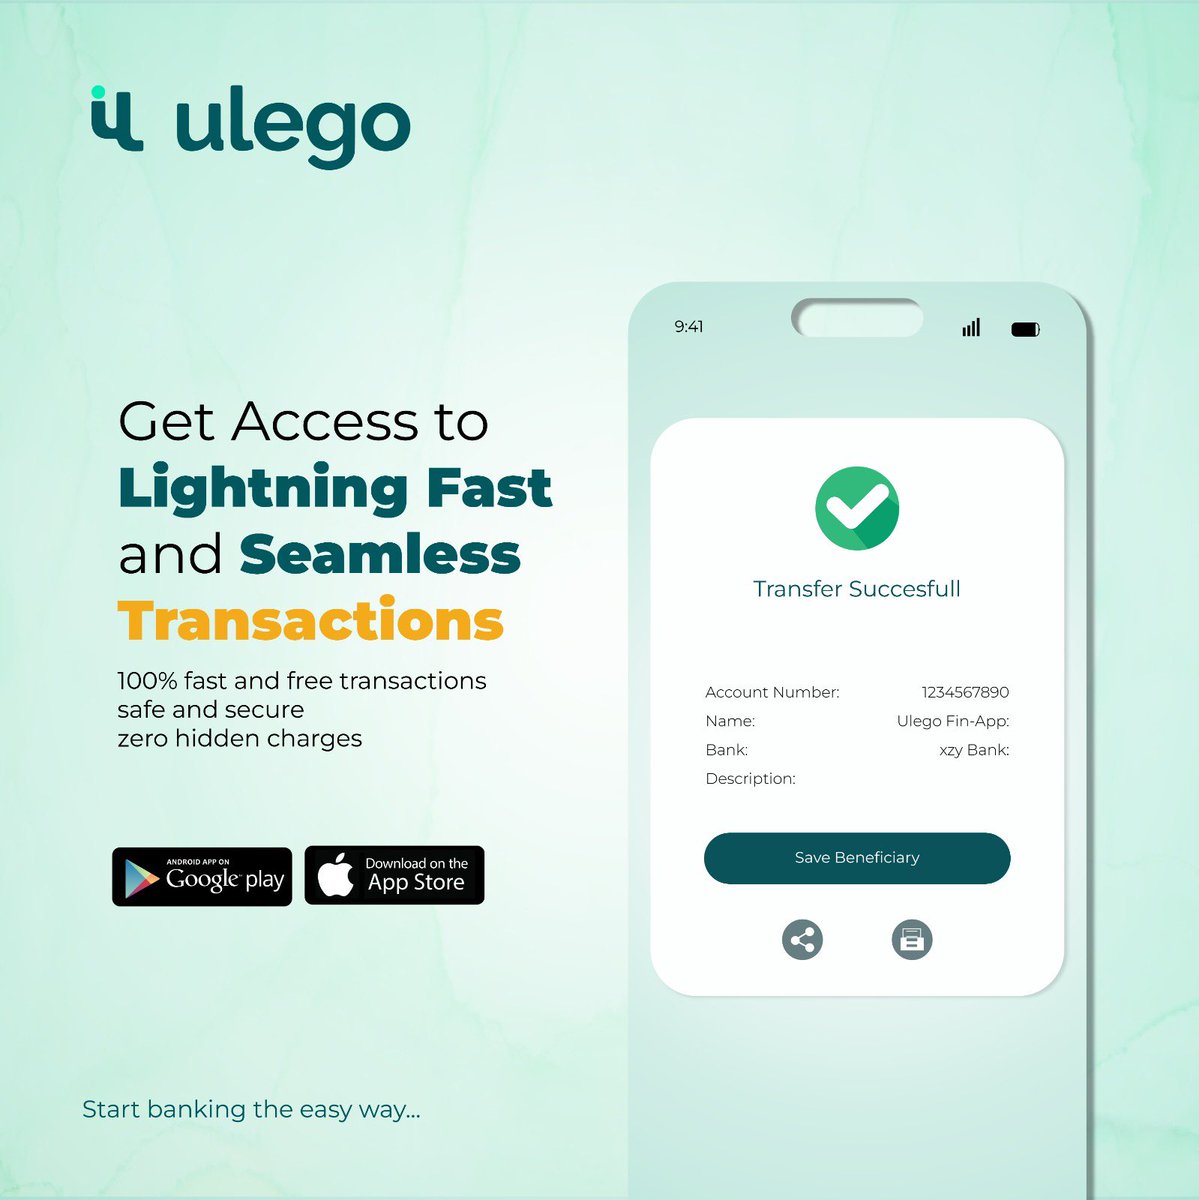 Are you tired of the constant no network or can’t send funds palava? We have built an easy and fast banking solution for all your financial needs. Less worries, more successful transactions! Download Ulego today, available on Playstore and App Store 💚 #fintech